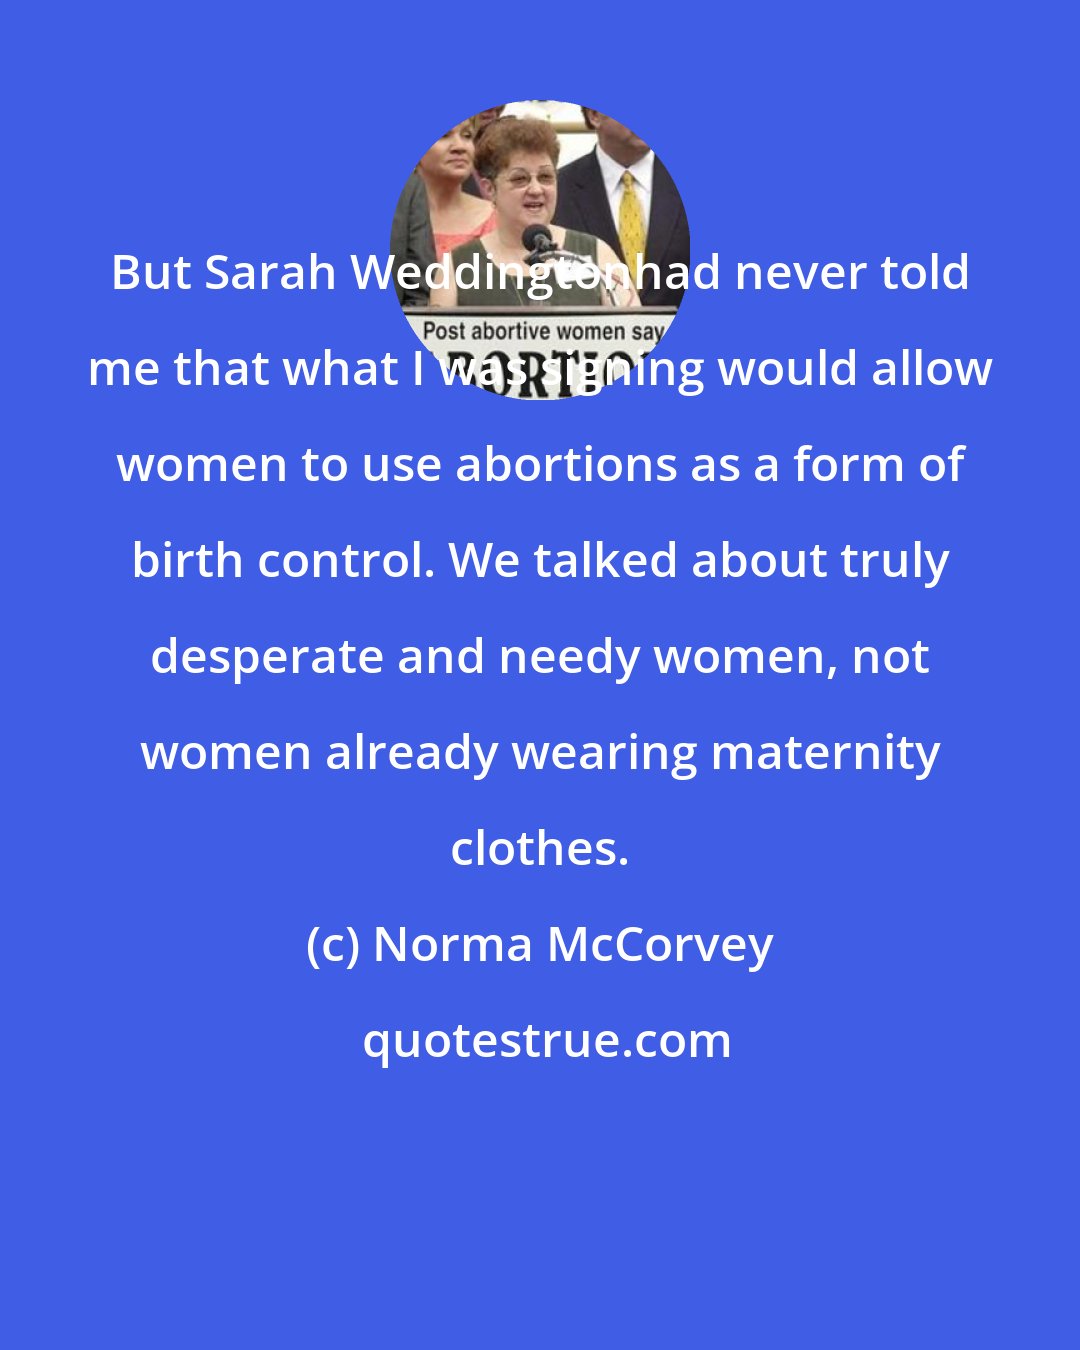 Norma McCorvey: But Sarah Weddingtonhad never told me that what I was signing would allow women to use abortions as a form of birth control. We talked about truly desperate and needy women, not women already wearing maternity clothes.